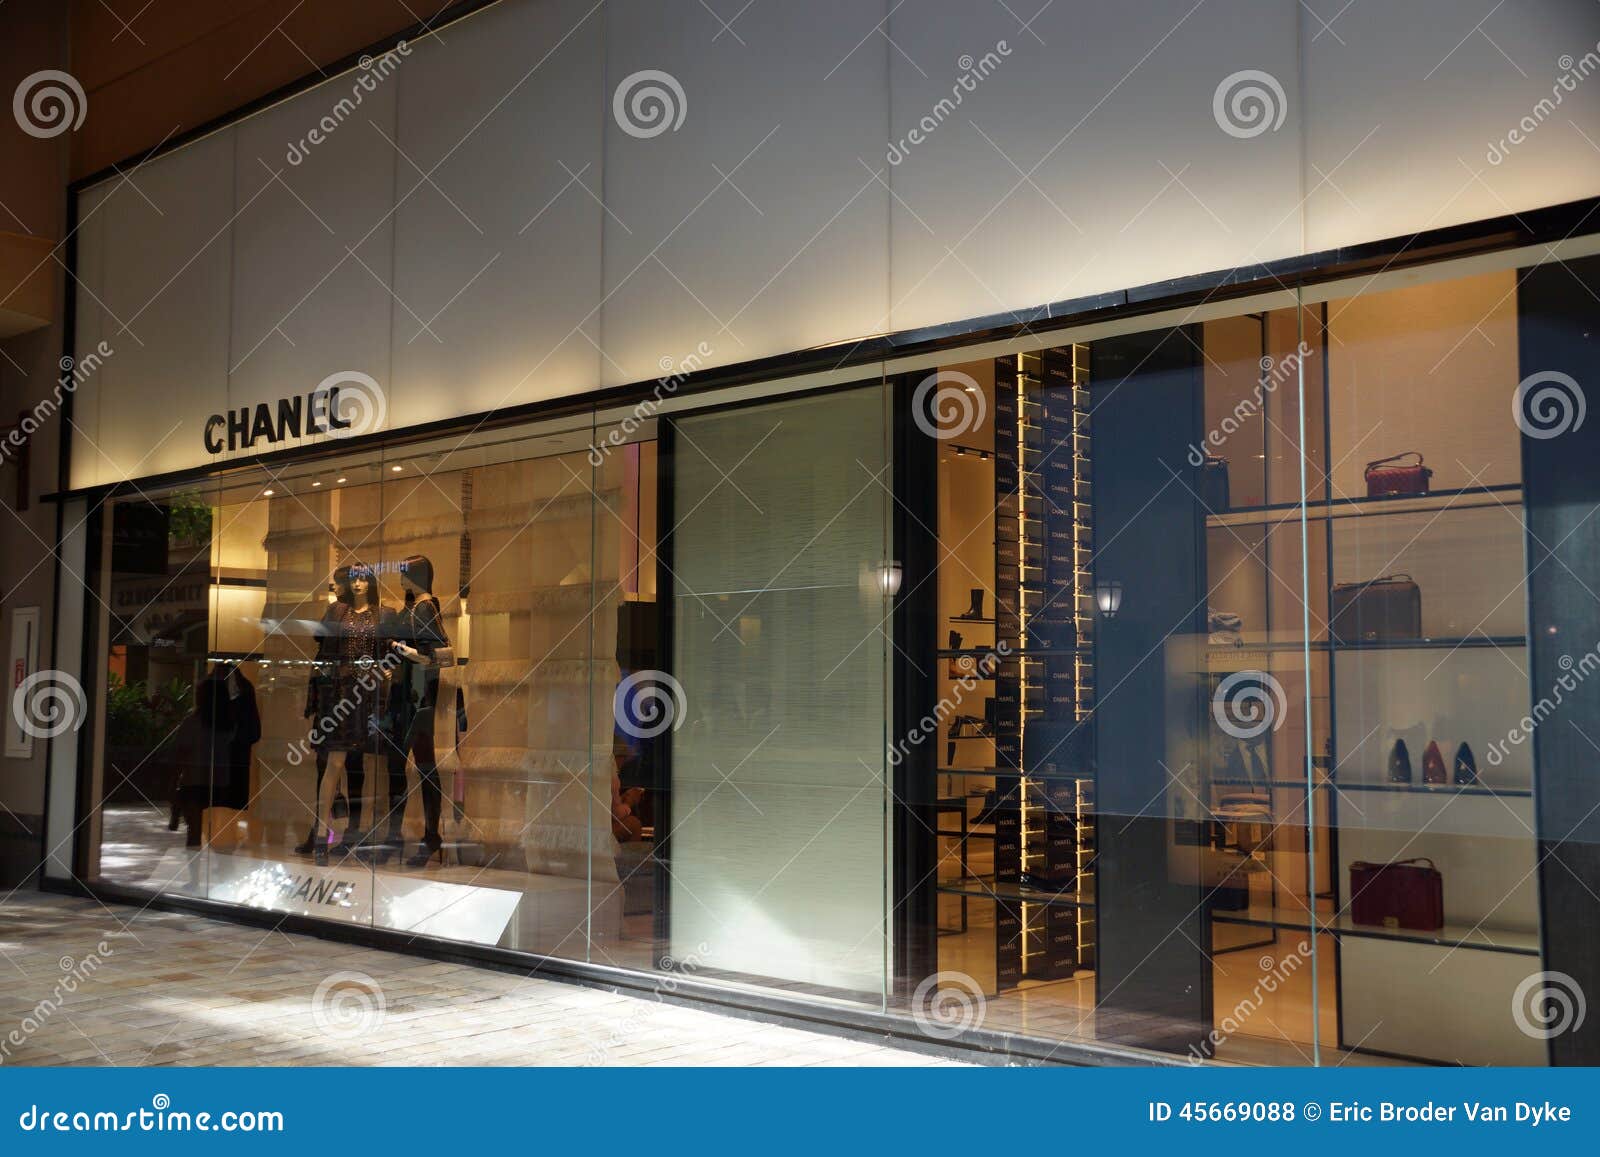 Chanel Store at the Ala Moana Center Editorial Stock Photo - Image